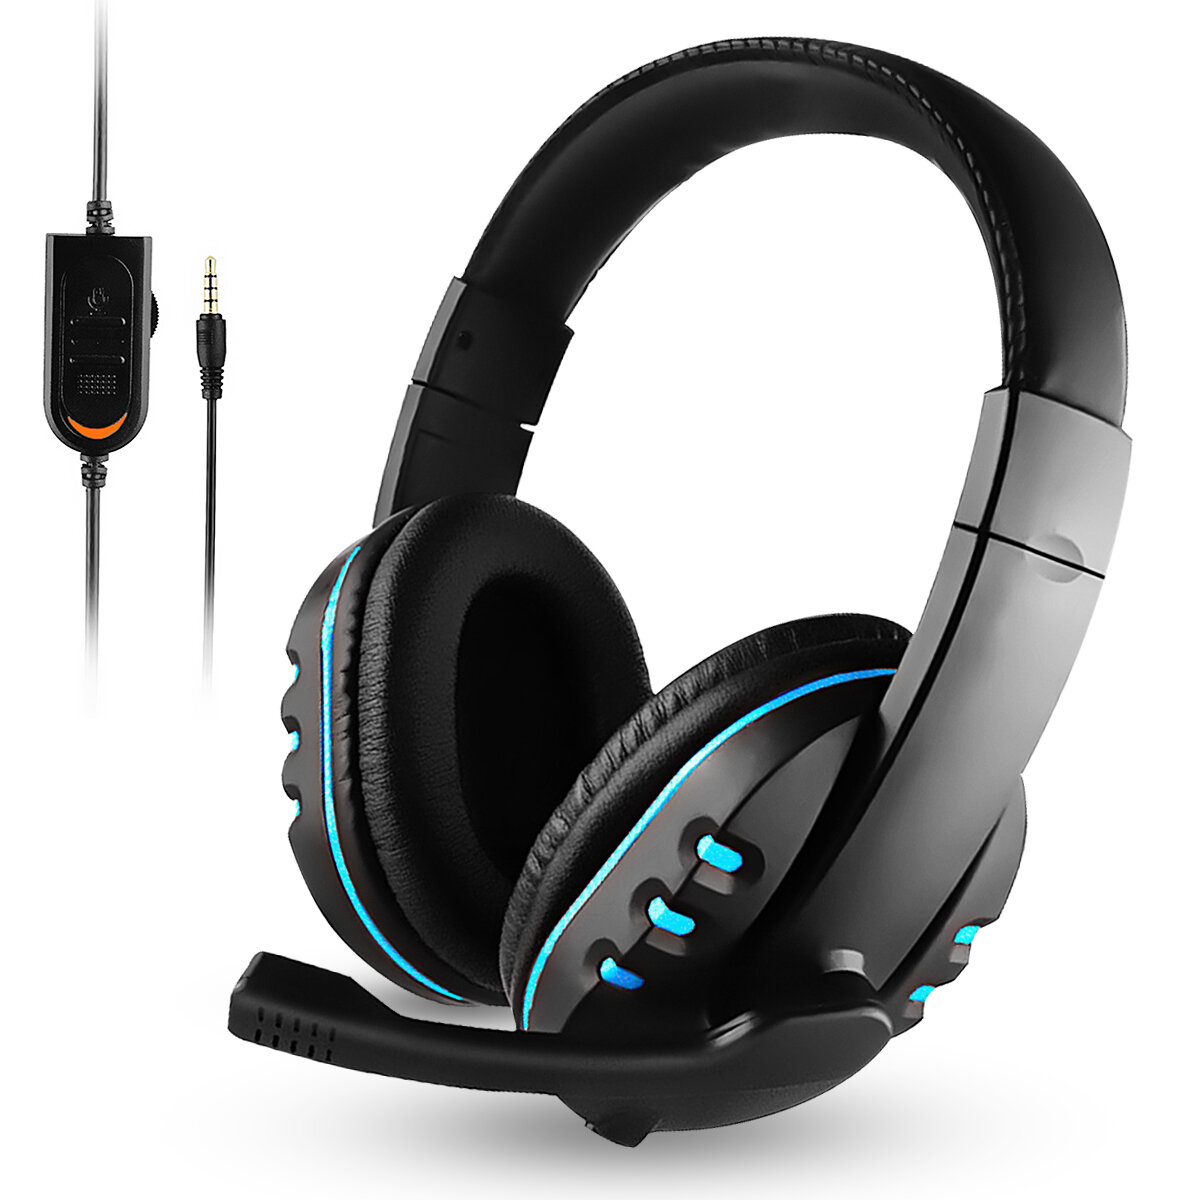 Bakeey Wired Stereo Bass Surround Gaming Headset for PC Laptop Headphone with Microphone